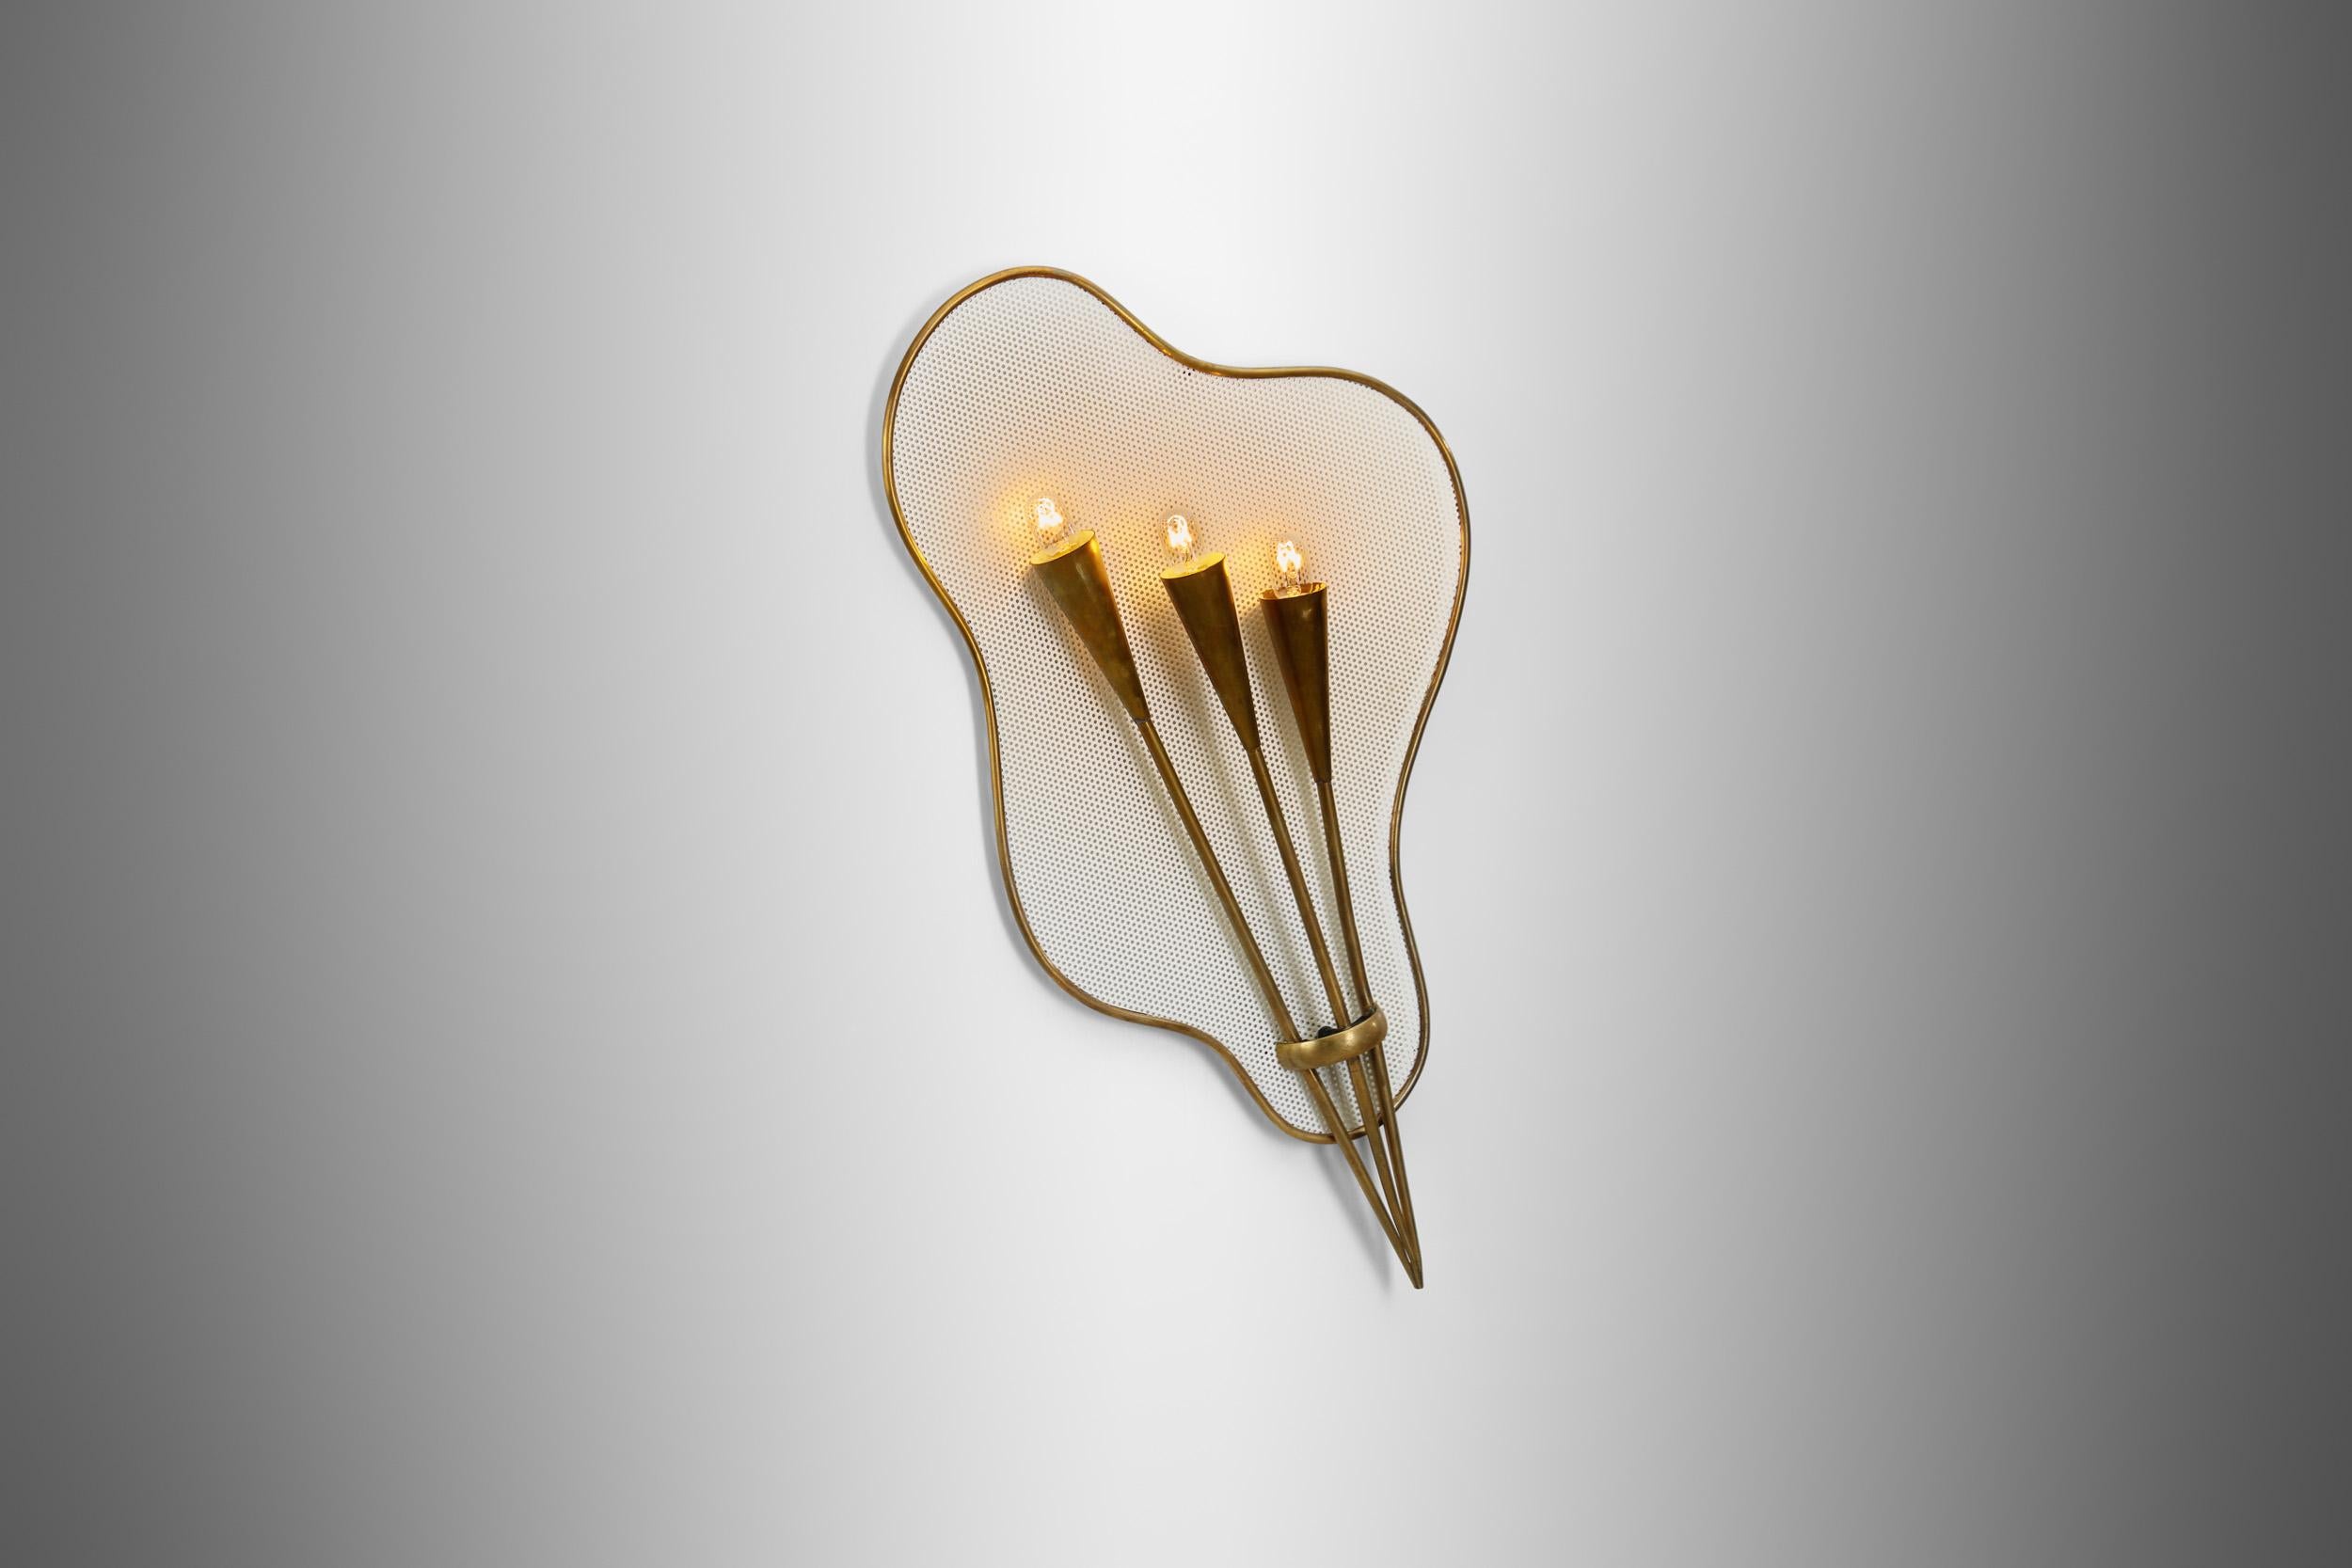 The mid-20th century brought about a revolution in design throughout Europe, where function and form merged in the most intriguing ways. One such example of this era’s creativity is this exceptionally unique wall lamp attributed to the French